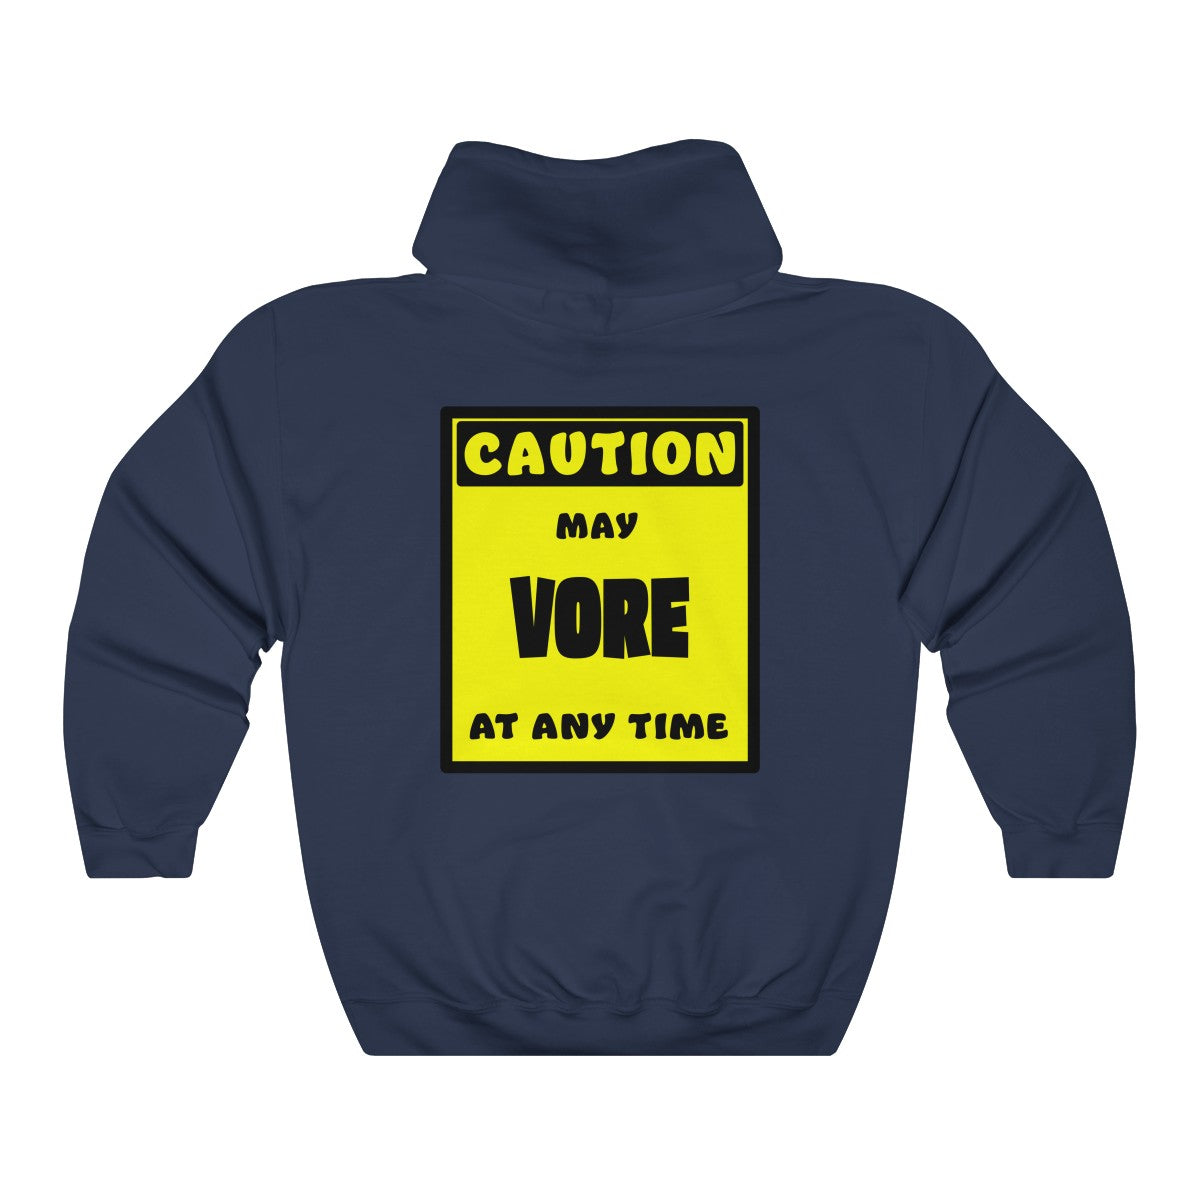 CAUTION! May VORE at any time! - Hoodie Hoodie AFLT-Whootorca Navy Blue S 